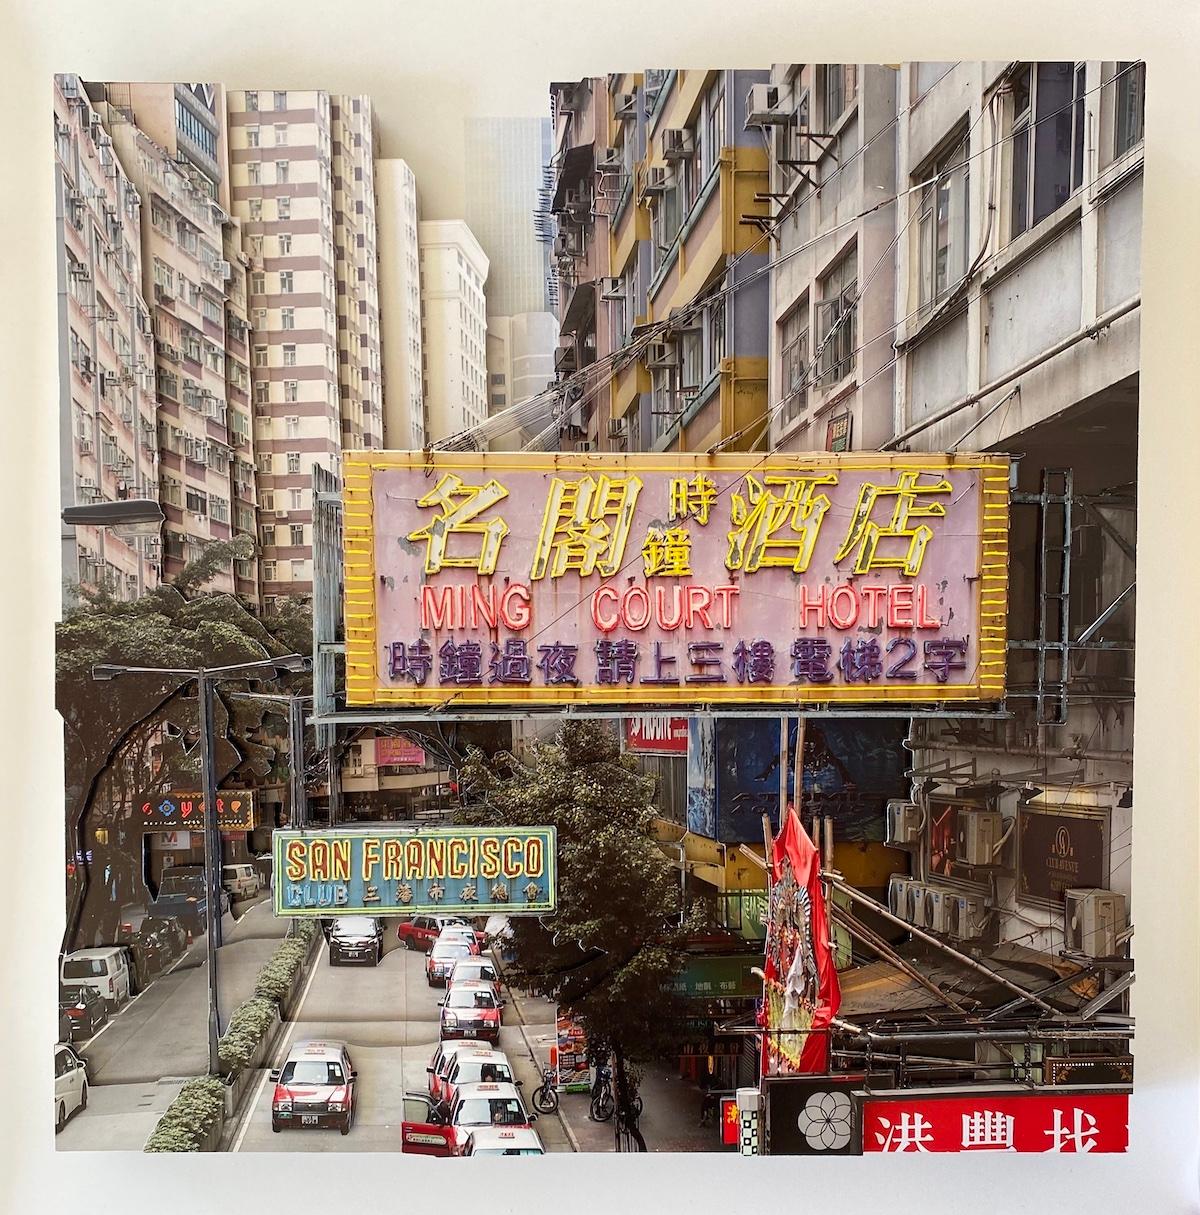 "Ming Court Hotel" by Camille Levert, 27.5 x 27.5 in, 2023